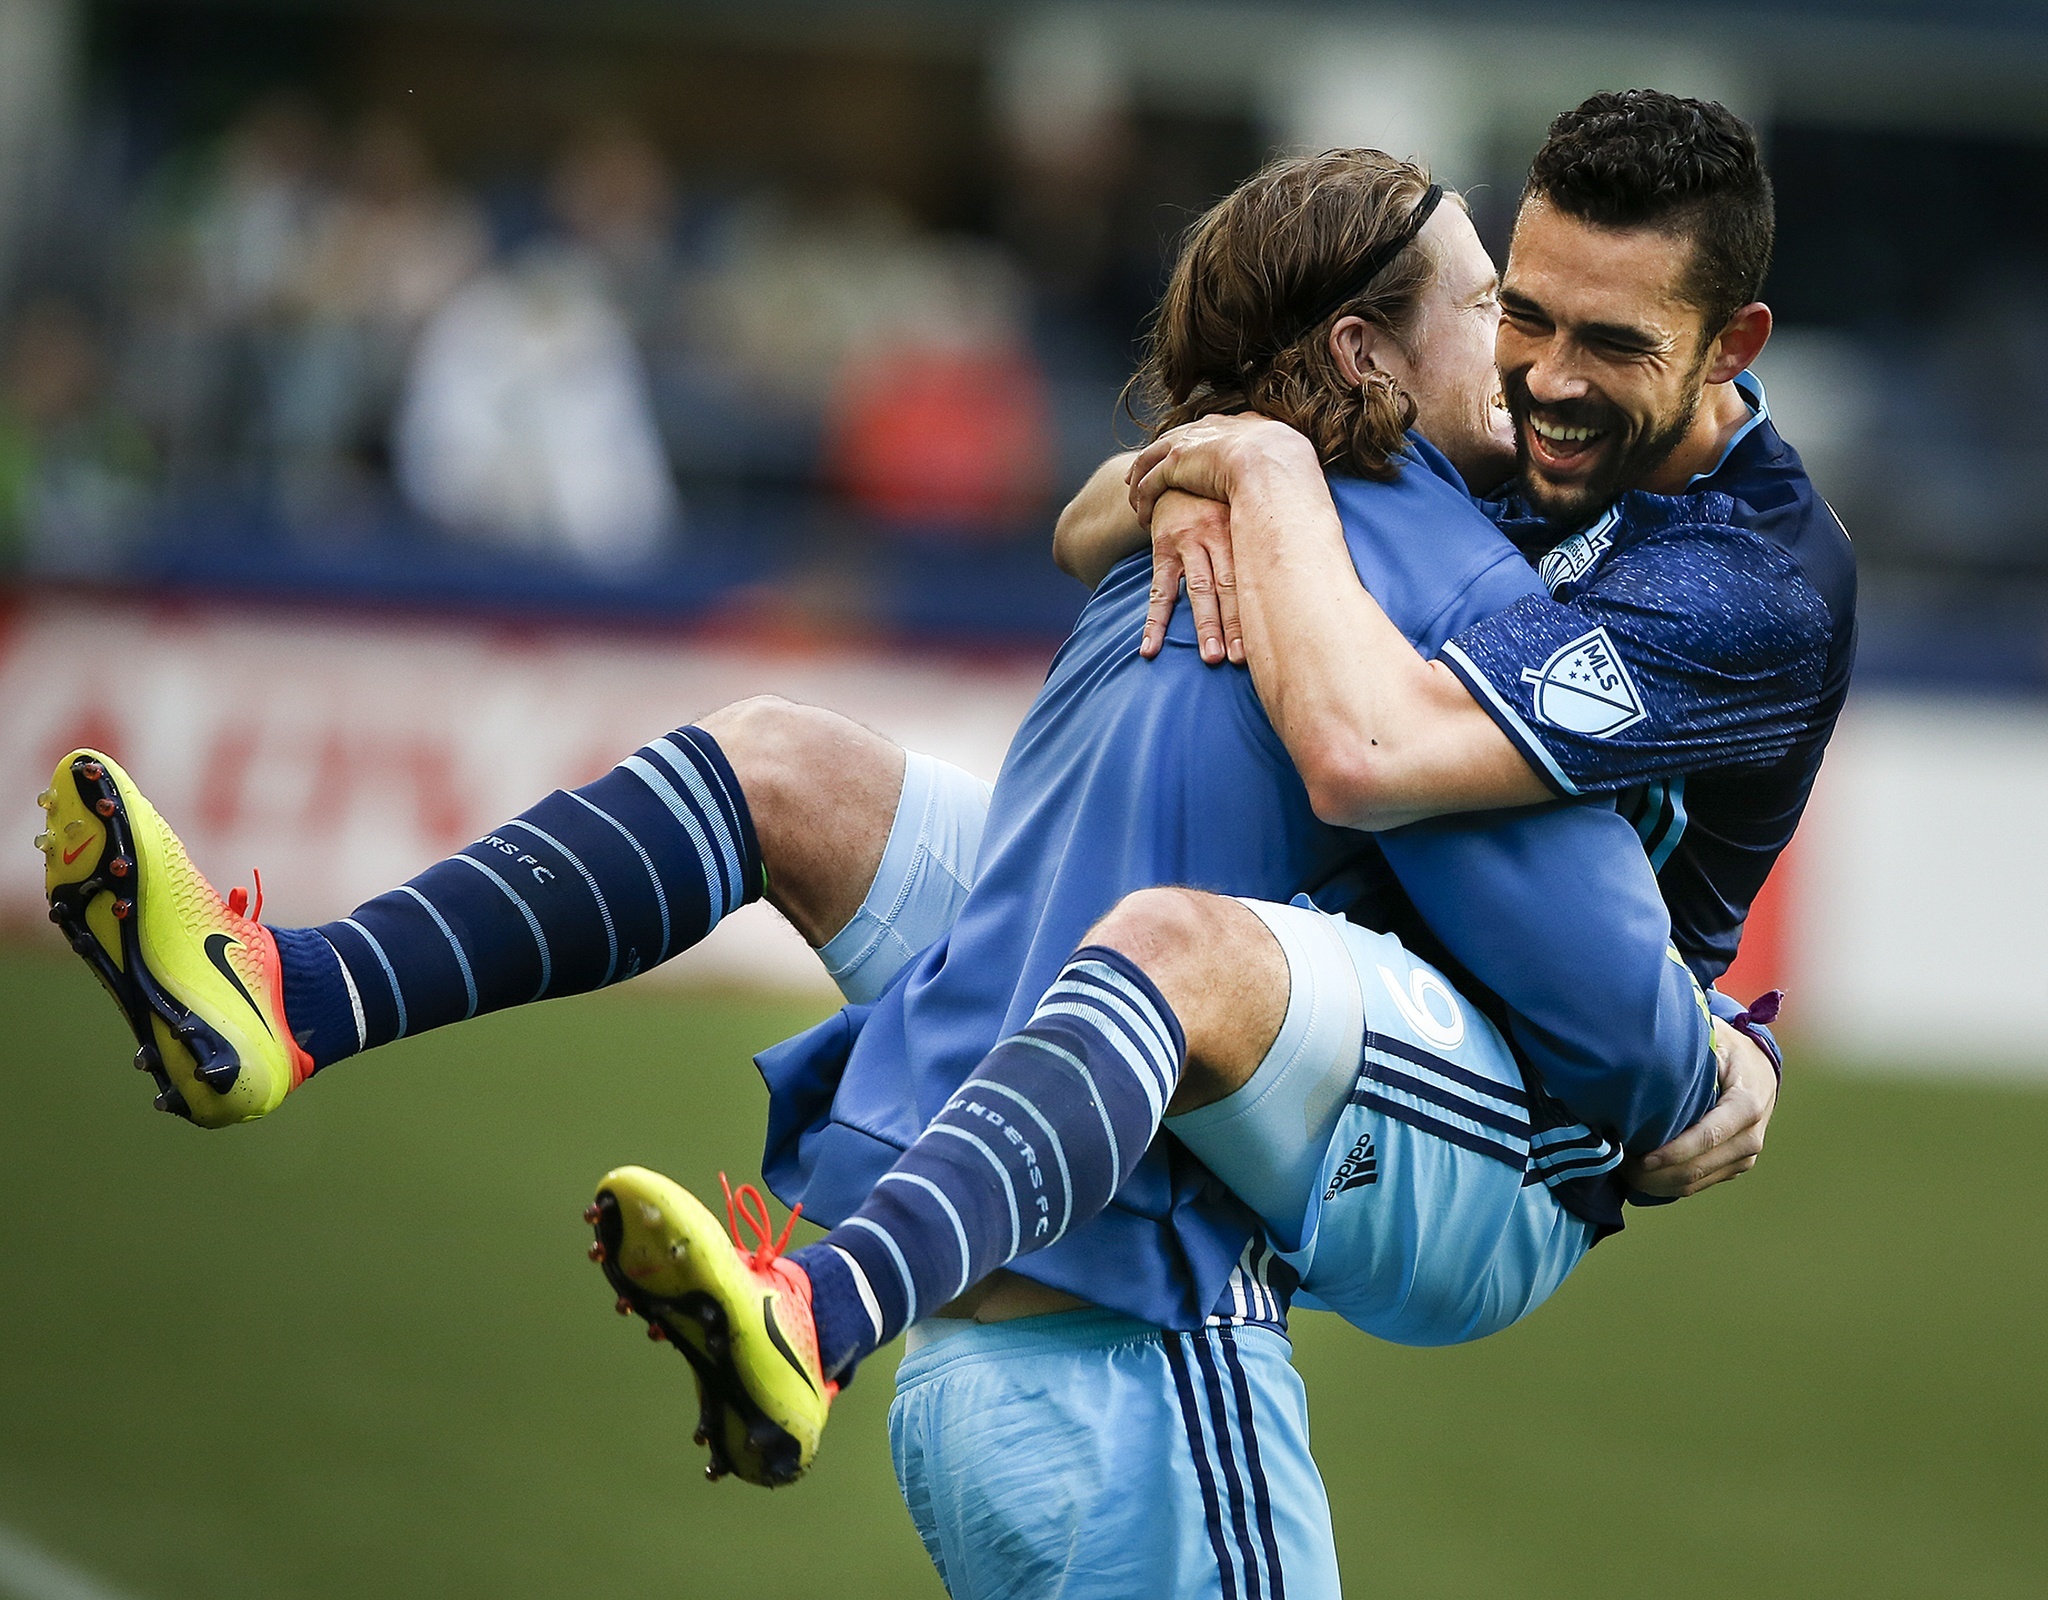 Sounders forward Herculez Gomez (right) leaps into the arms of teammate Erik Friberg after scoring on a penalty kick during an international friendly match against West Ham United at CenturyLink Field in Seattle on Tuesday. (Ian Terry / The Herald)